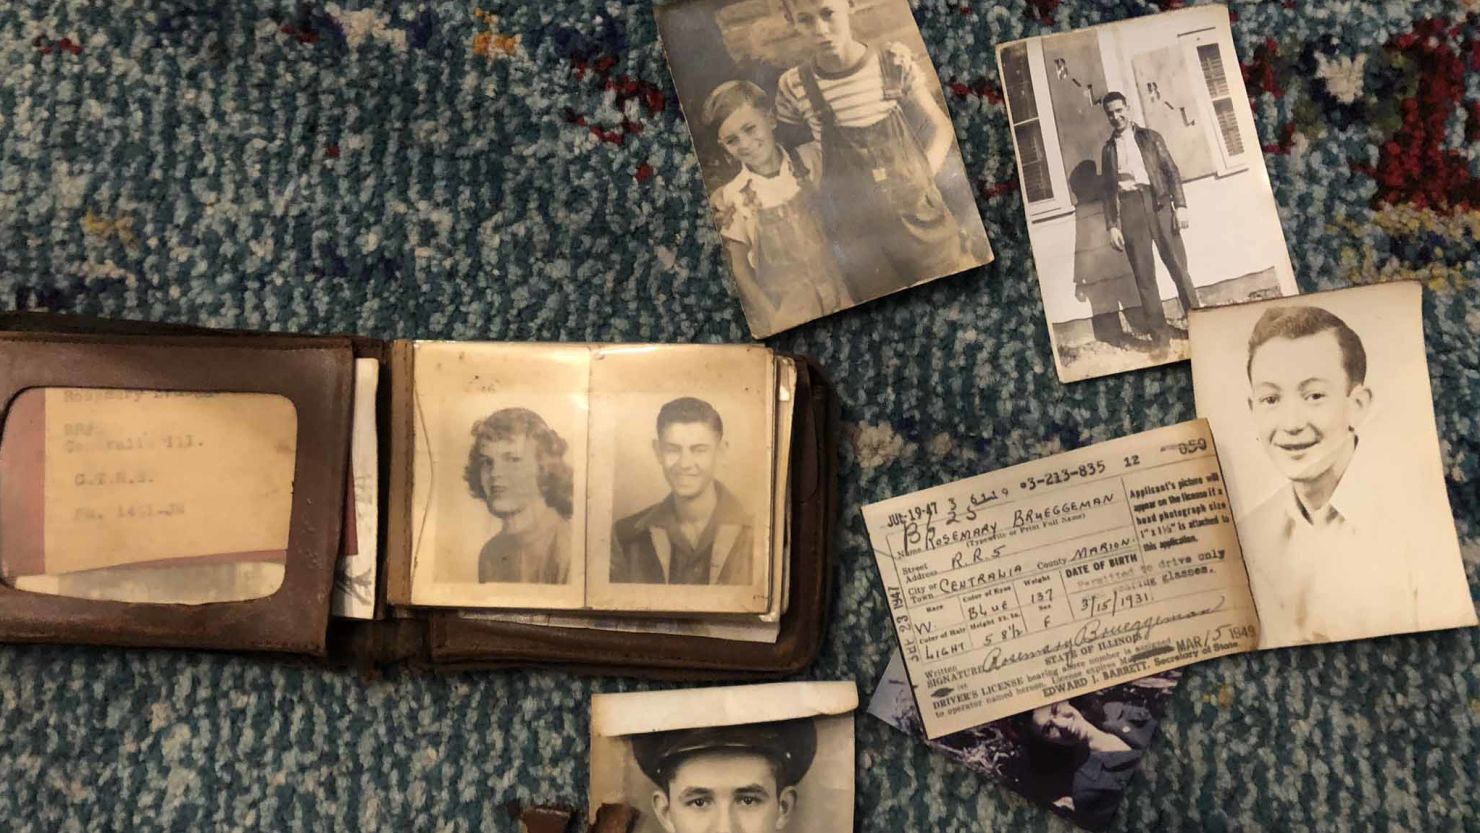 More than a dozen wallets from the 1940s were found in the old Centralia High School building.